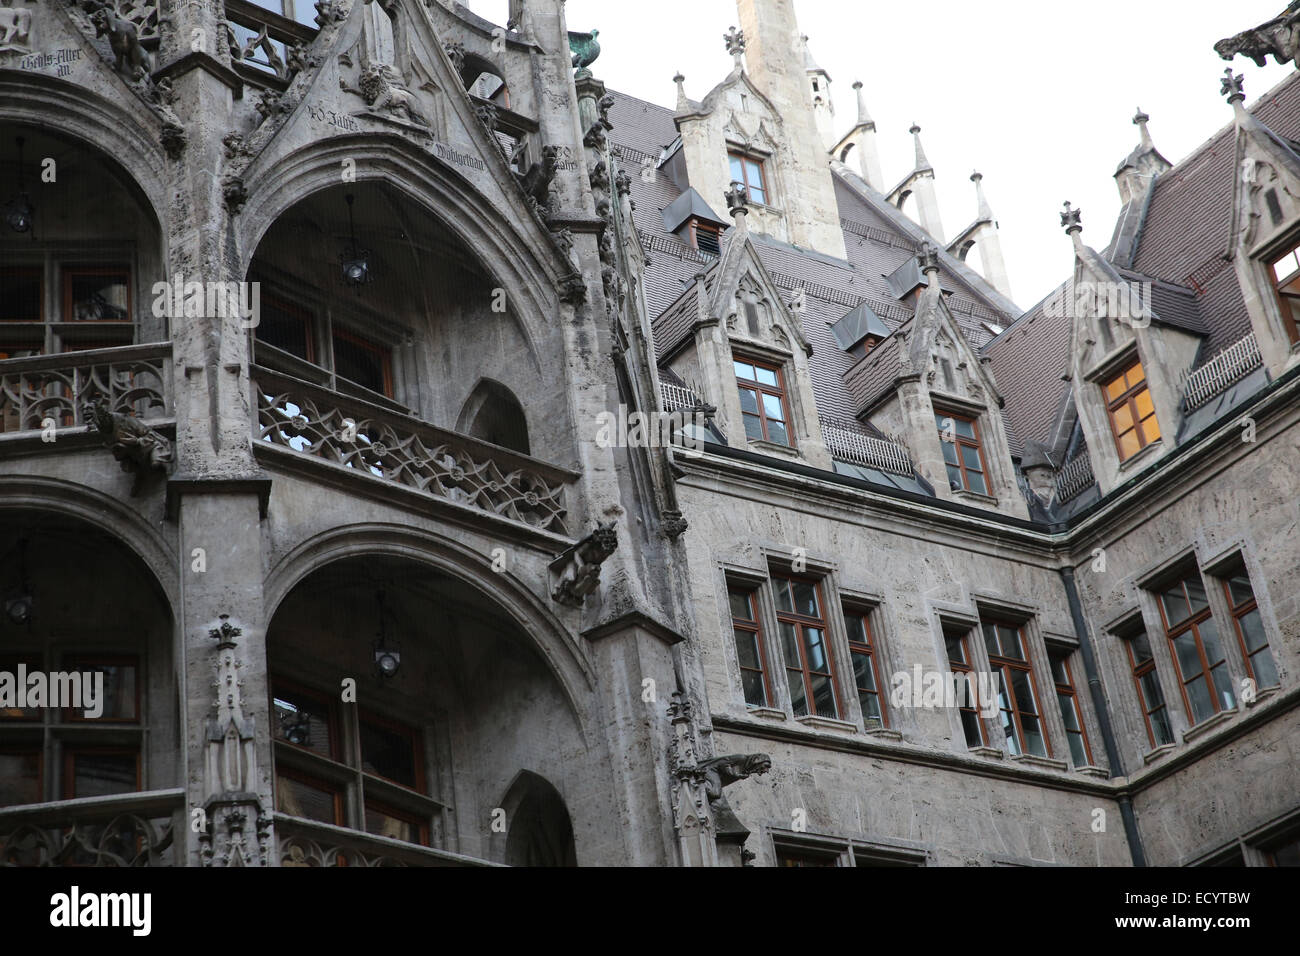 Munich town hall building architecture Stock Photo